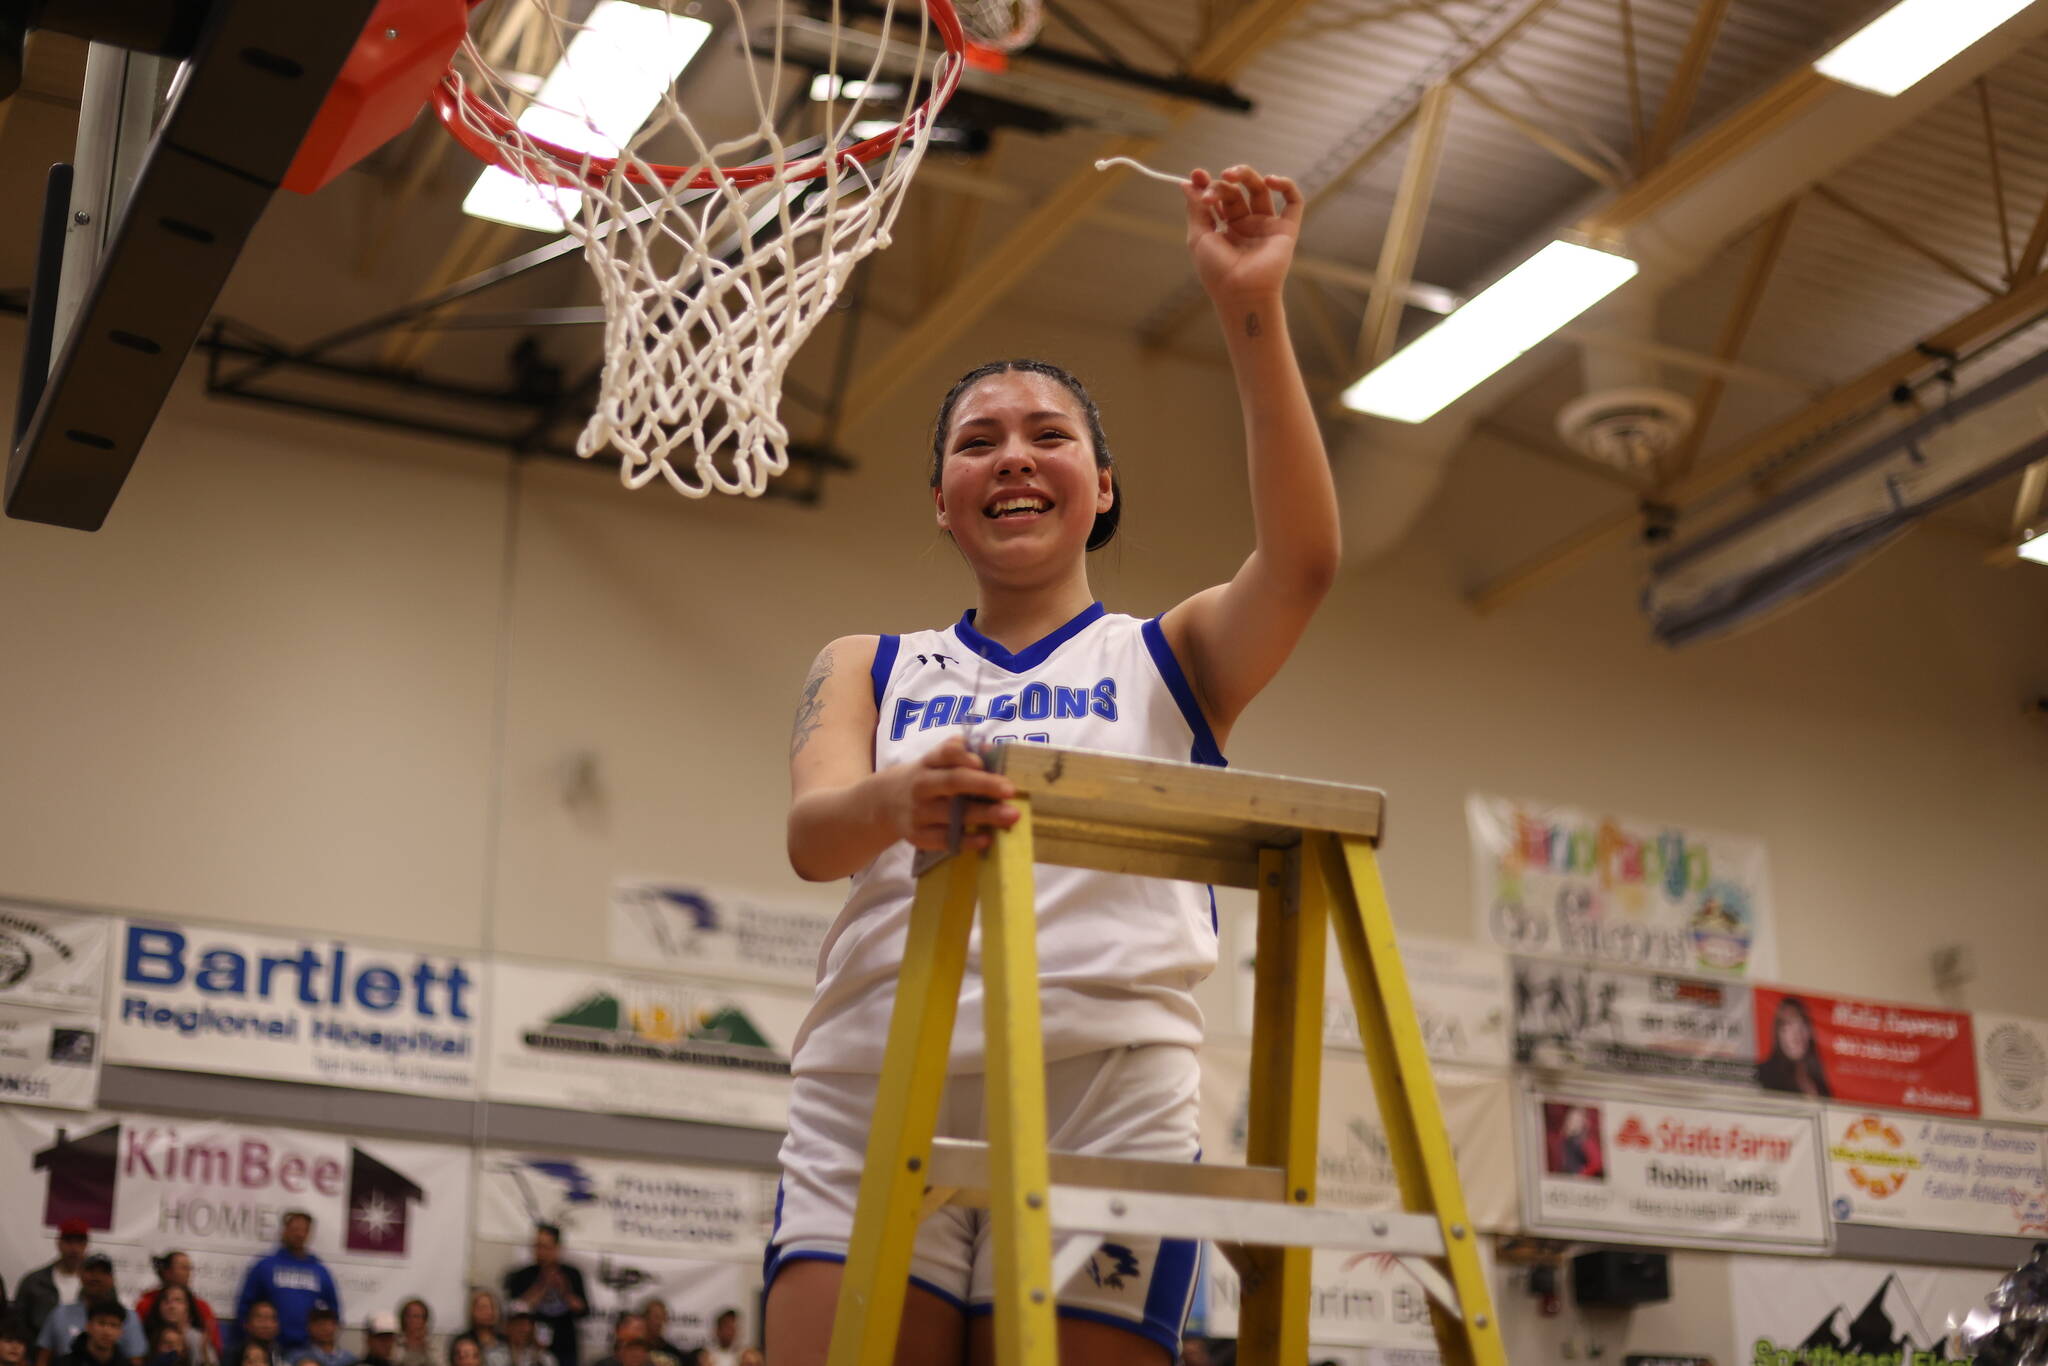 TMHS senior Kiara Kookesh holds up a strand from the net after securing the win against JDHS on Friday for the two teams’ final math up in the 4A Region V tournament. Kookesh tied for the lead in scoring with a total of 12 points. (Ben Hohenstatt / Juneau Empire)